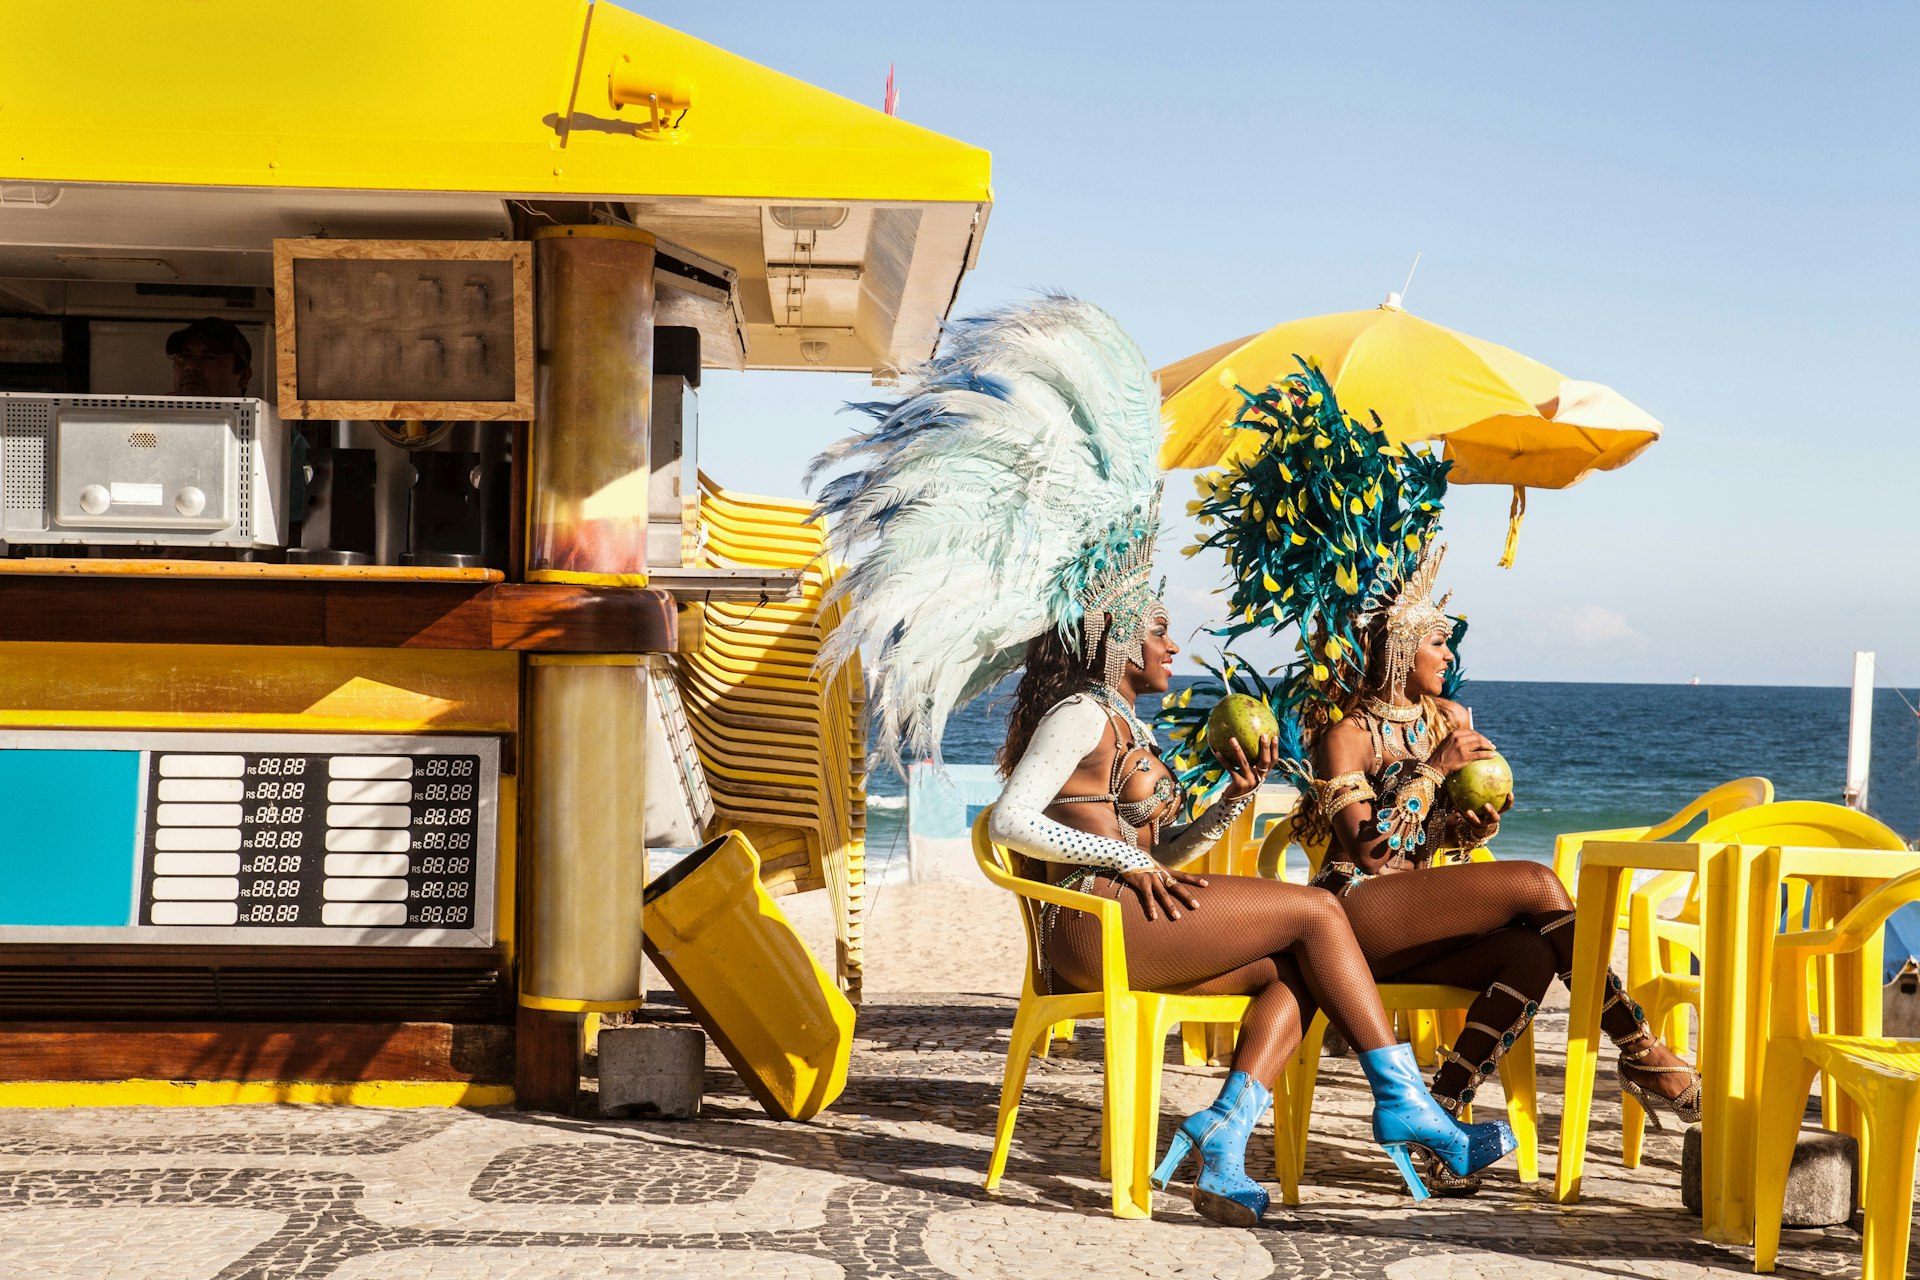 Samba dancers in feathered headpieces and skimpy Carnival dress, holding coconuts with straws and sitting outside a refreshment stand at Ipanema Beach, with the ocean visible in the background